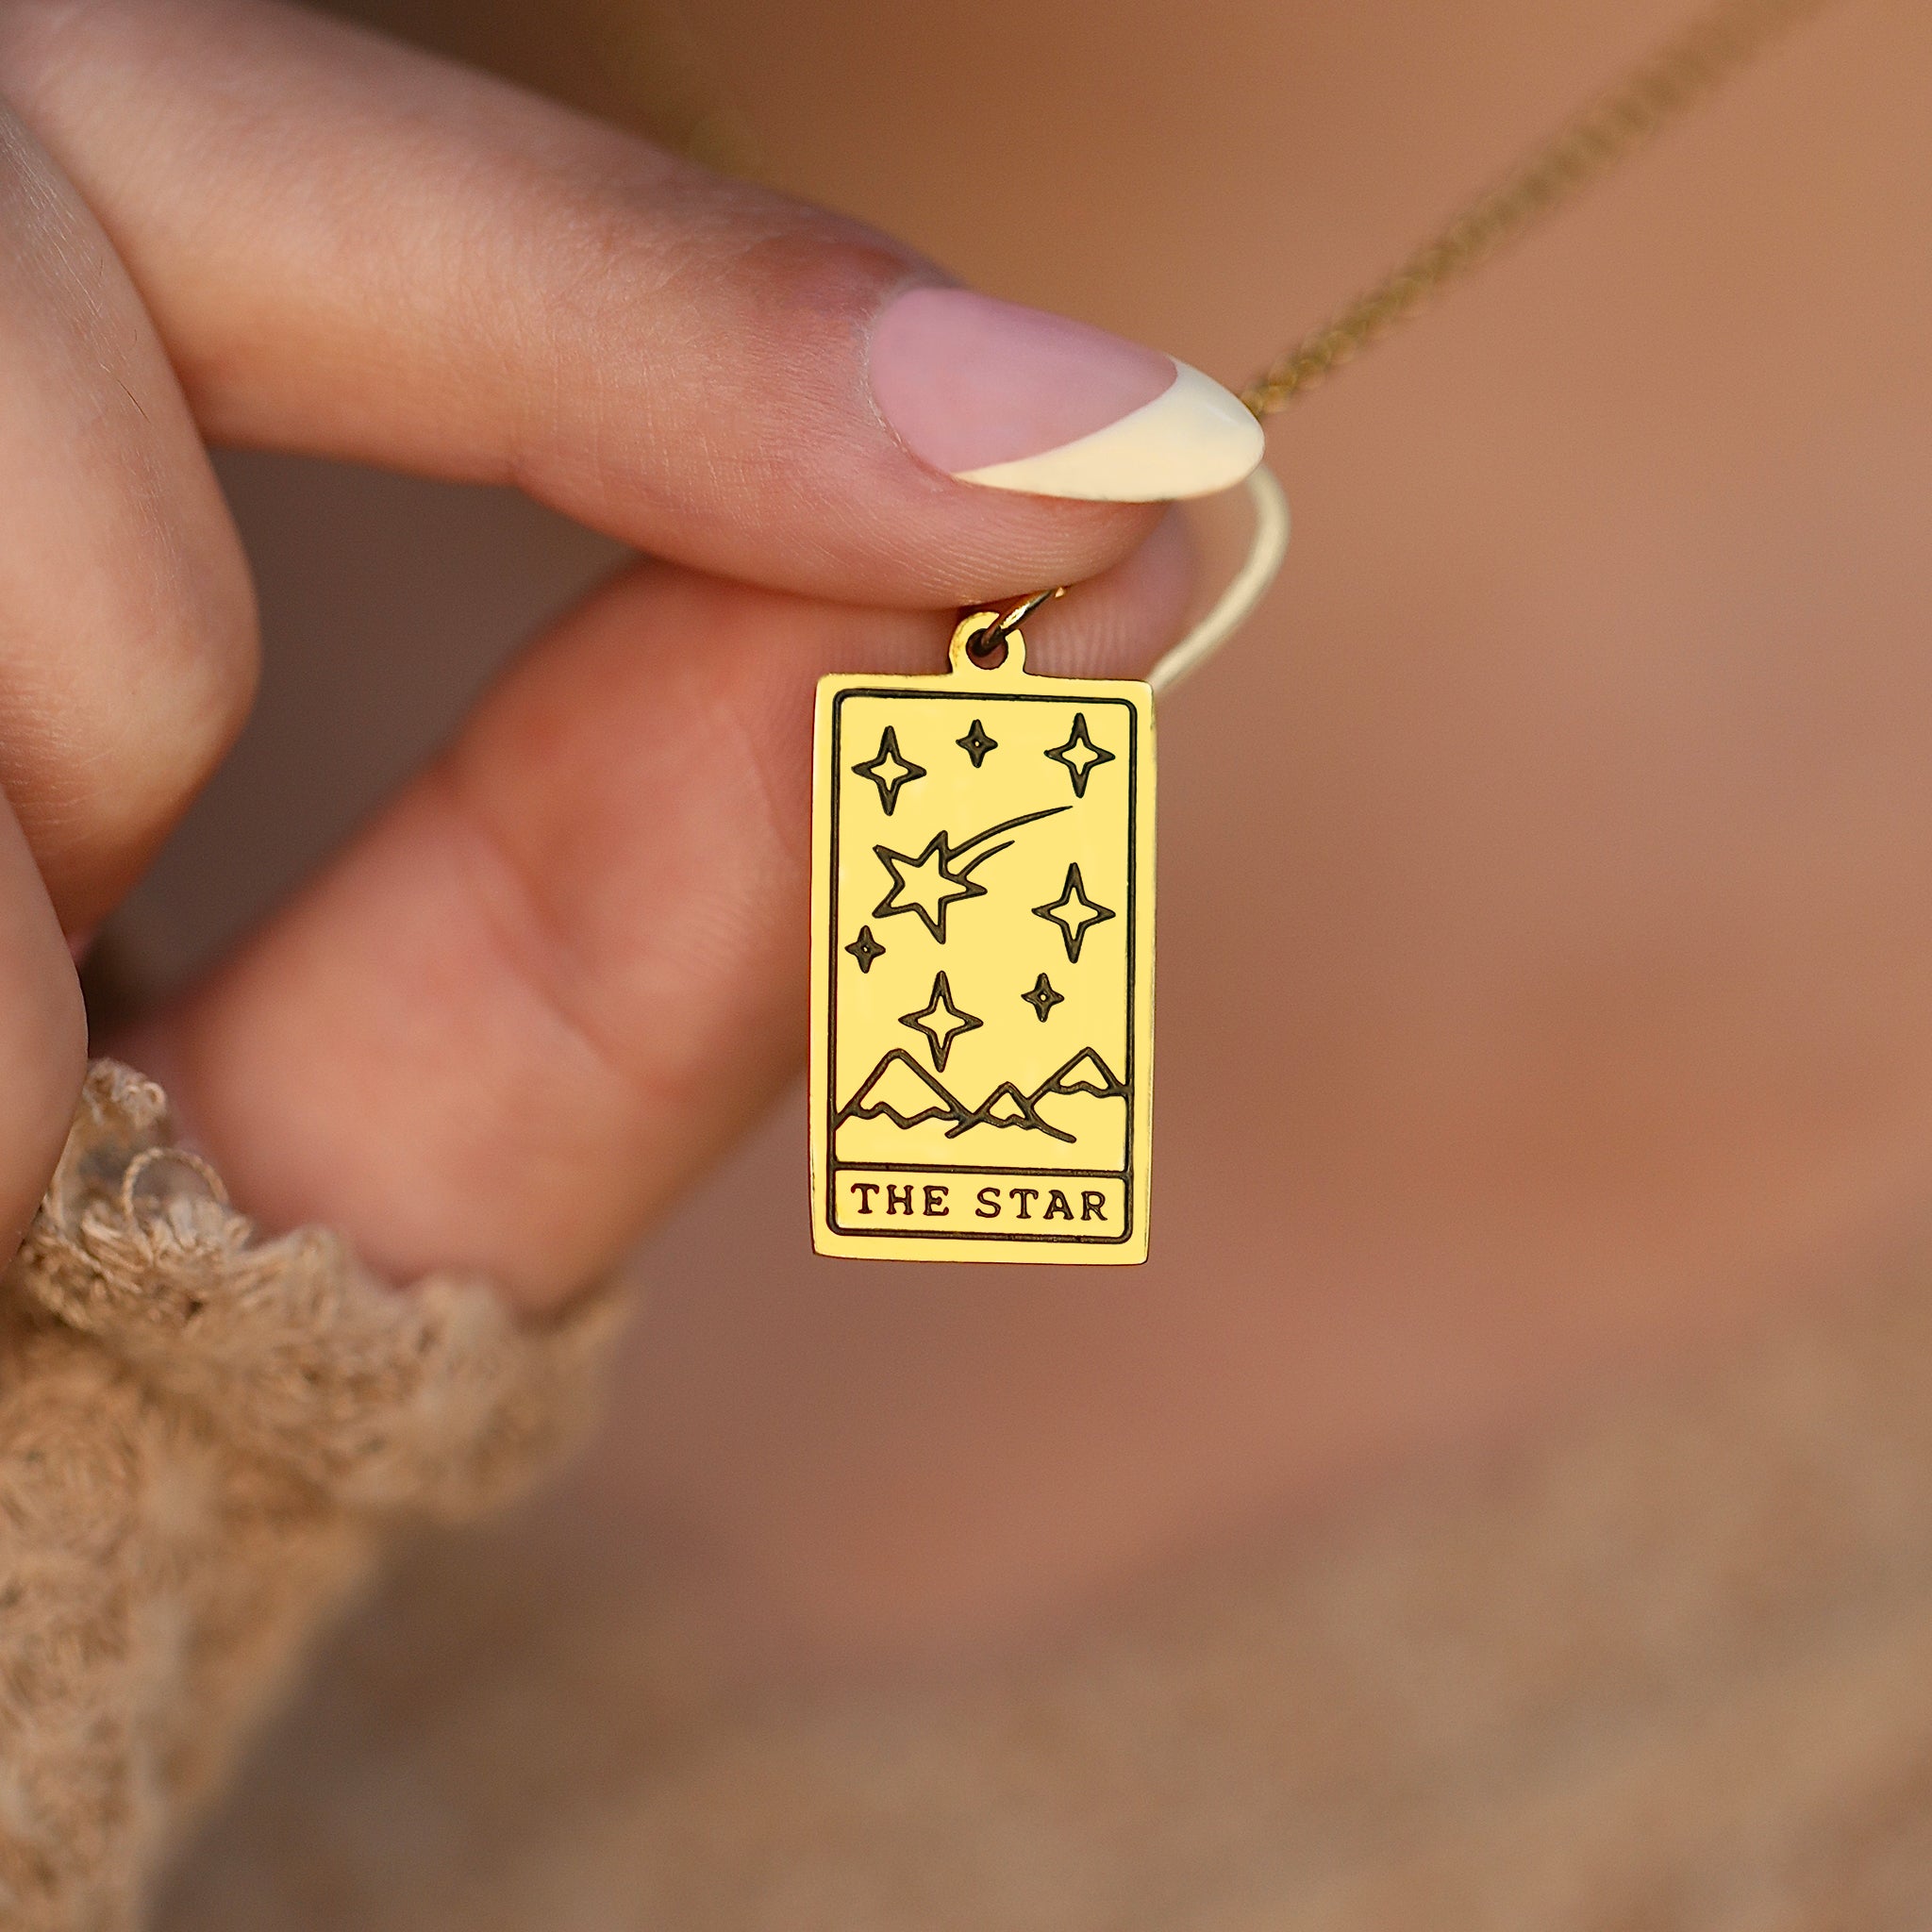 TheStarTarotCardNecklace Gold May2022 Studio LifestylePicture 1 1